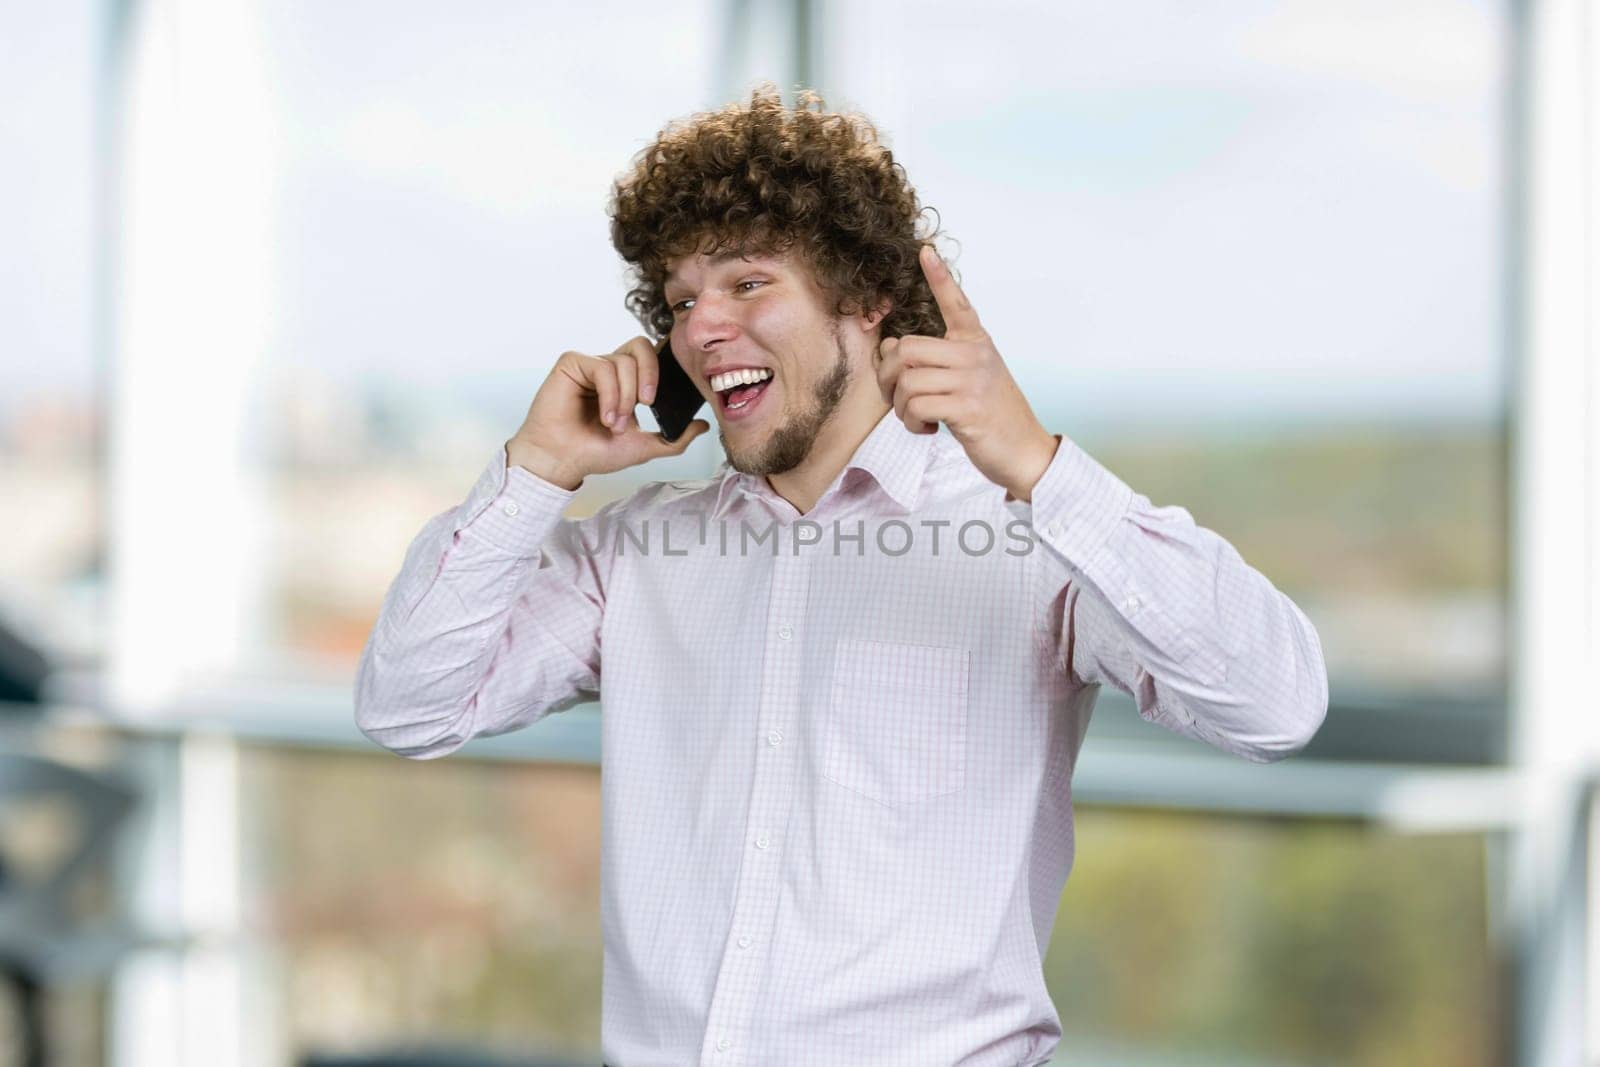 Portrait of a young happy man with curly hair talking on the phone rejoicing success. Indoor window in the background.